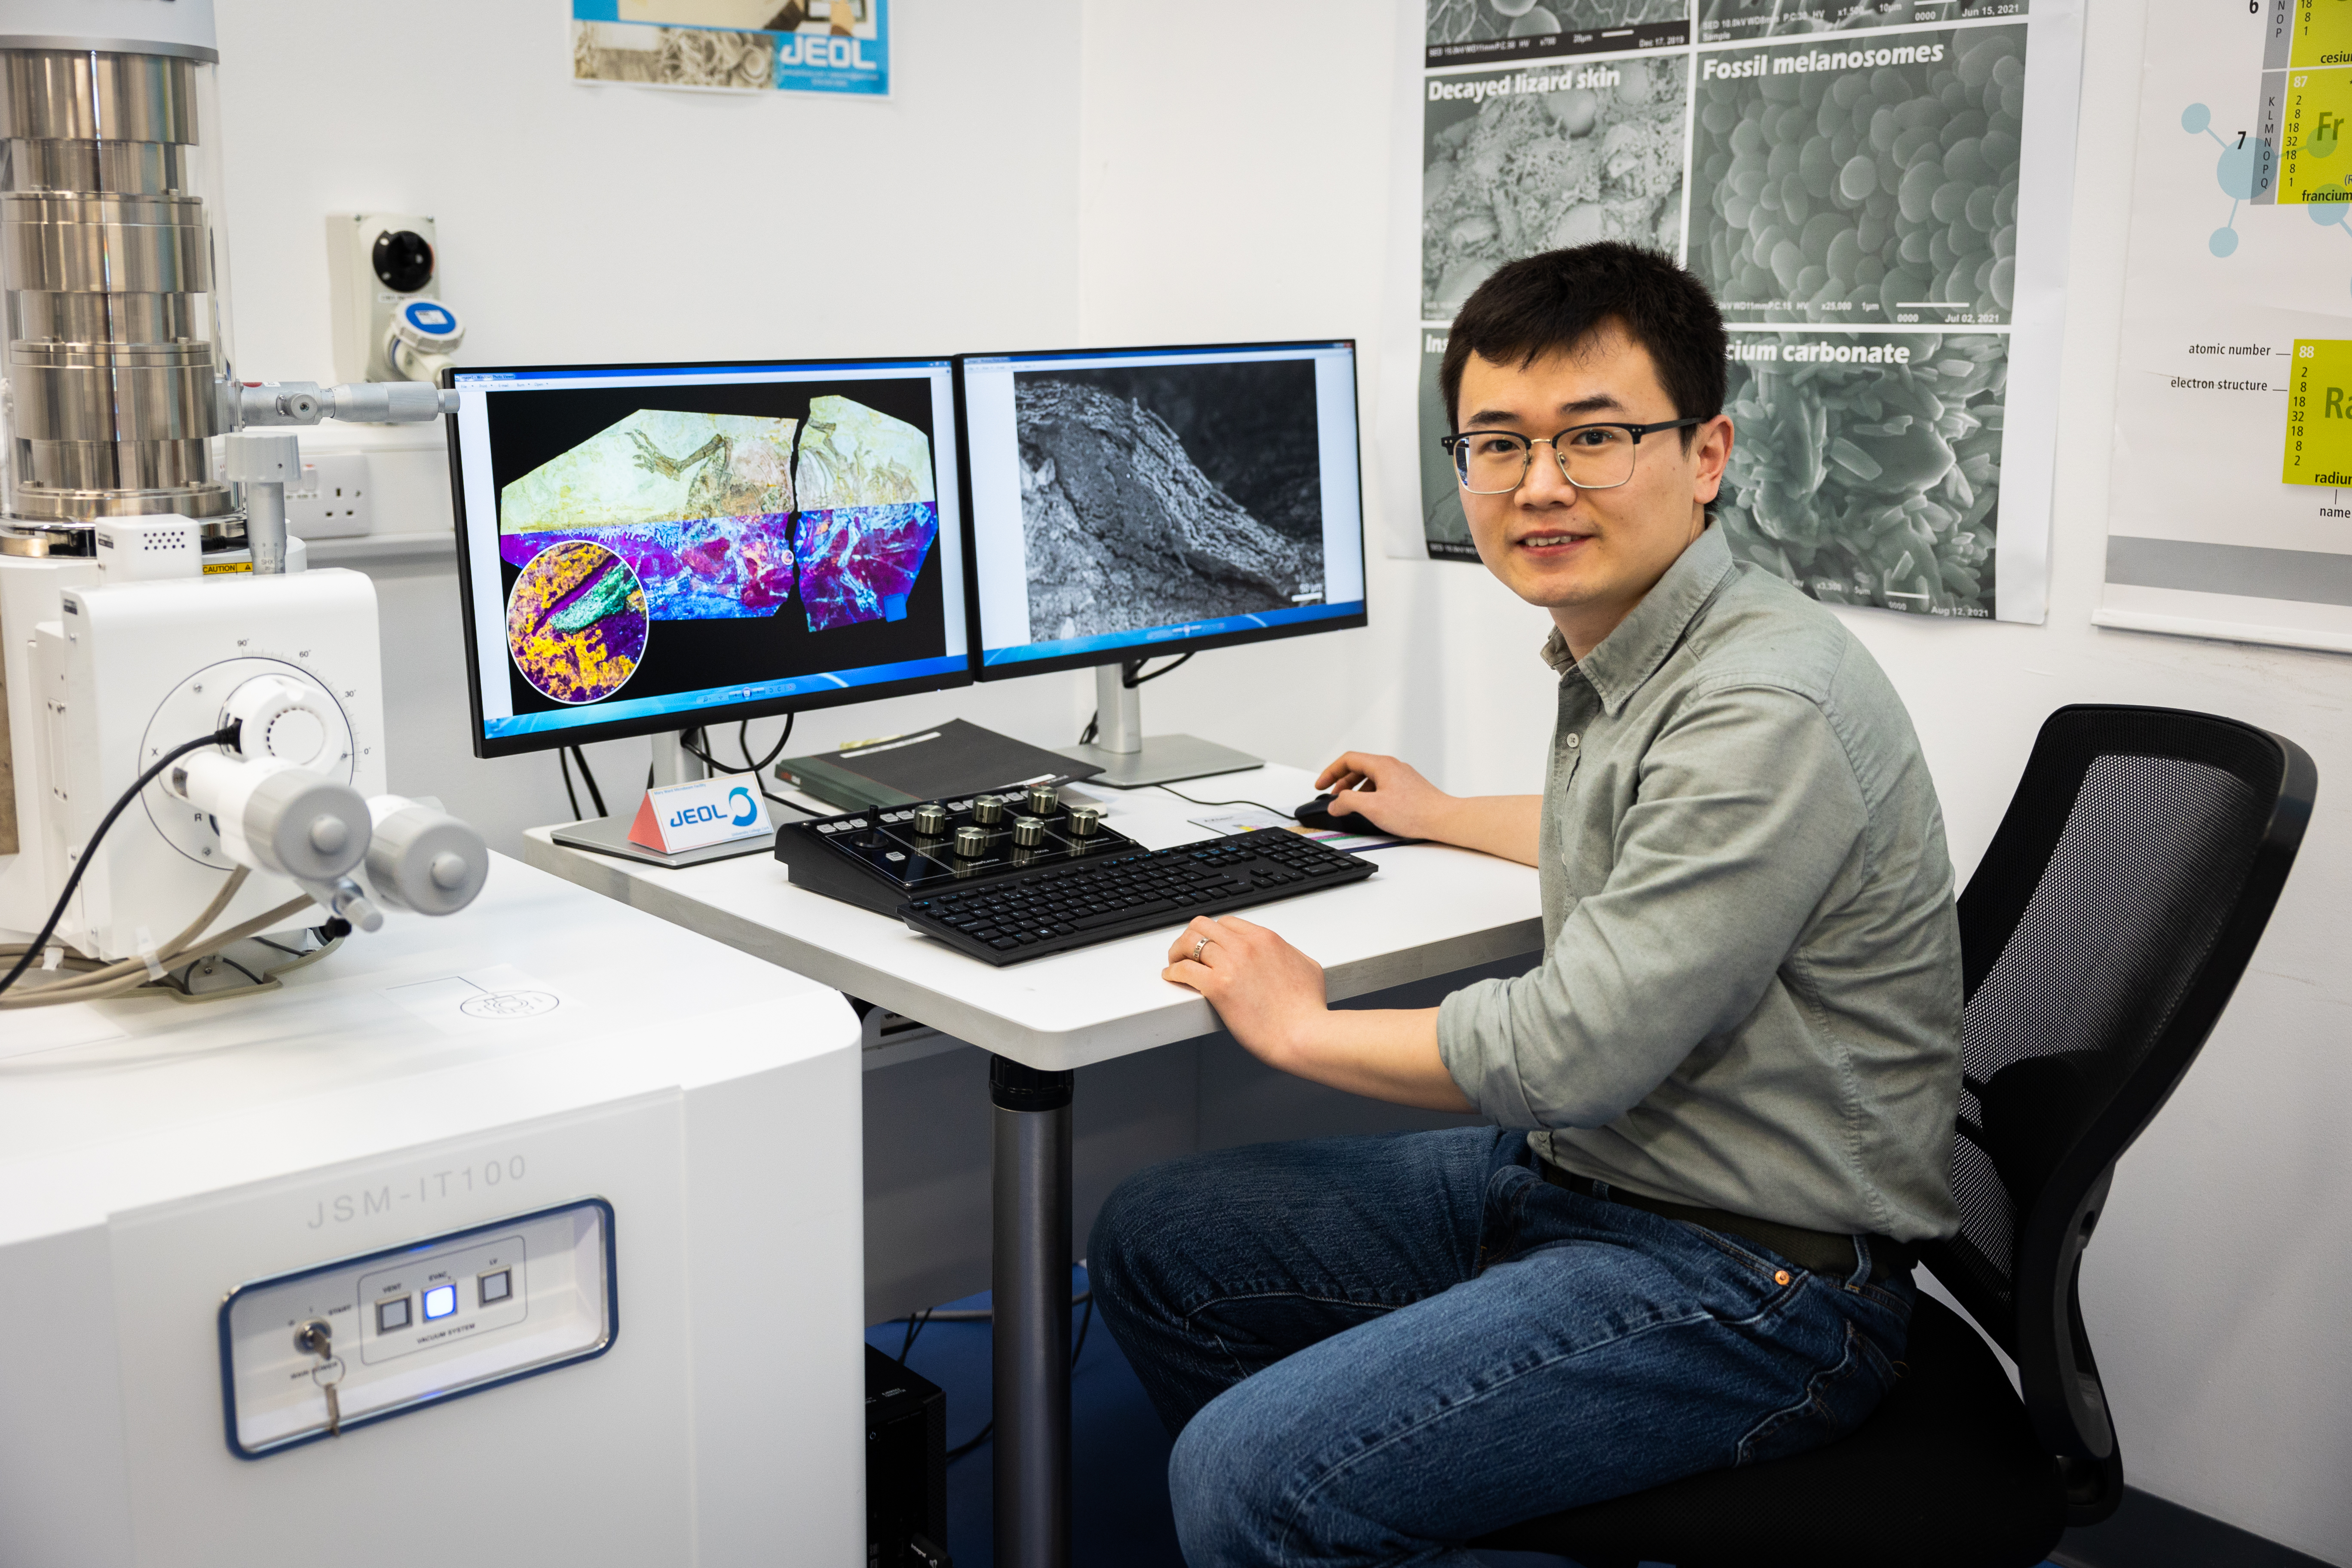 Dr Zixiao Yang of University College Cork, Ireland, who led the research team that discovered zoned skin development in the feathered dinosaur Psittacosaurus. Photo: Ruben Tapia/UCC TV